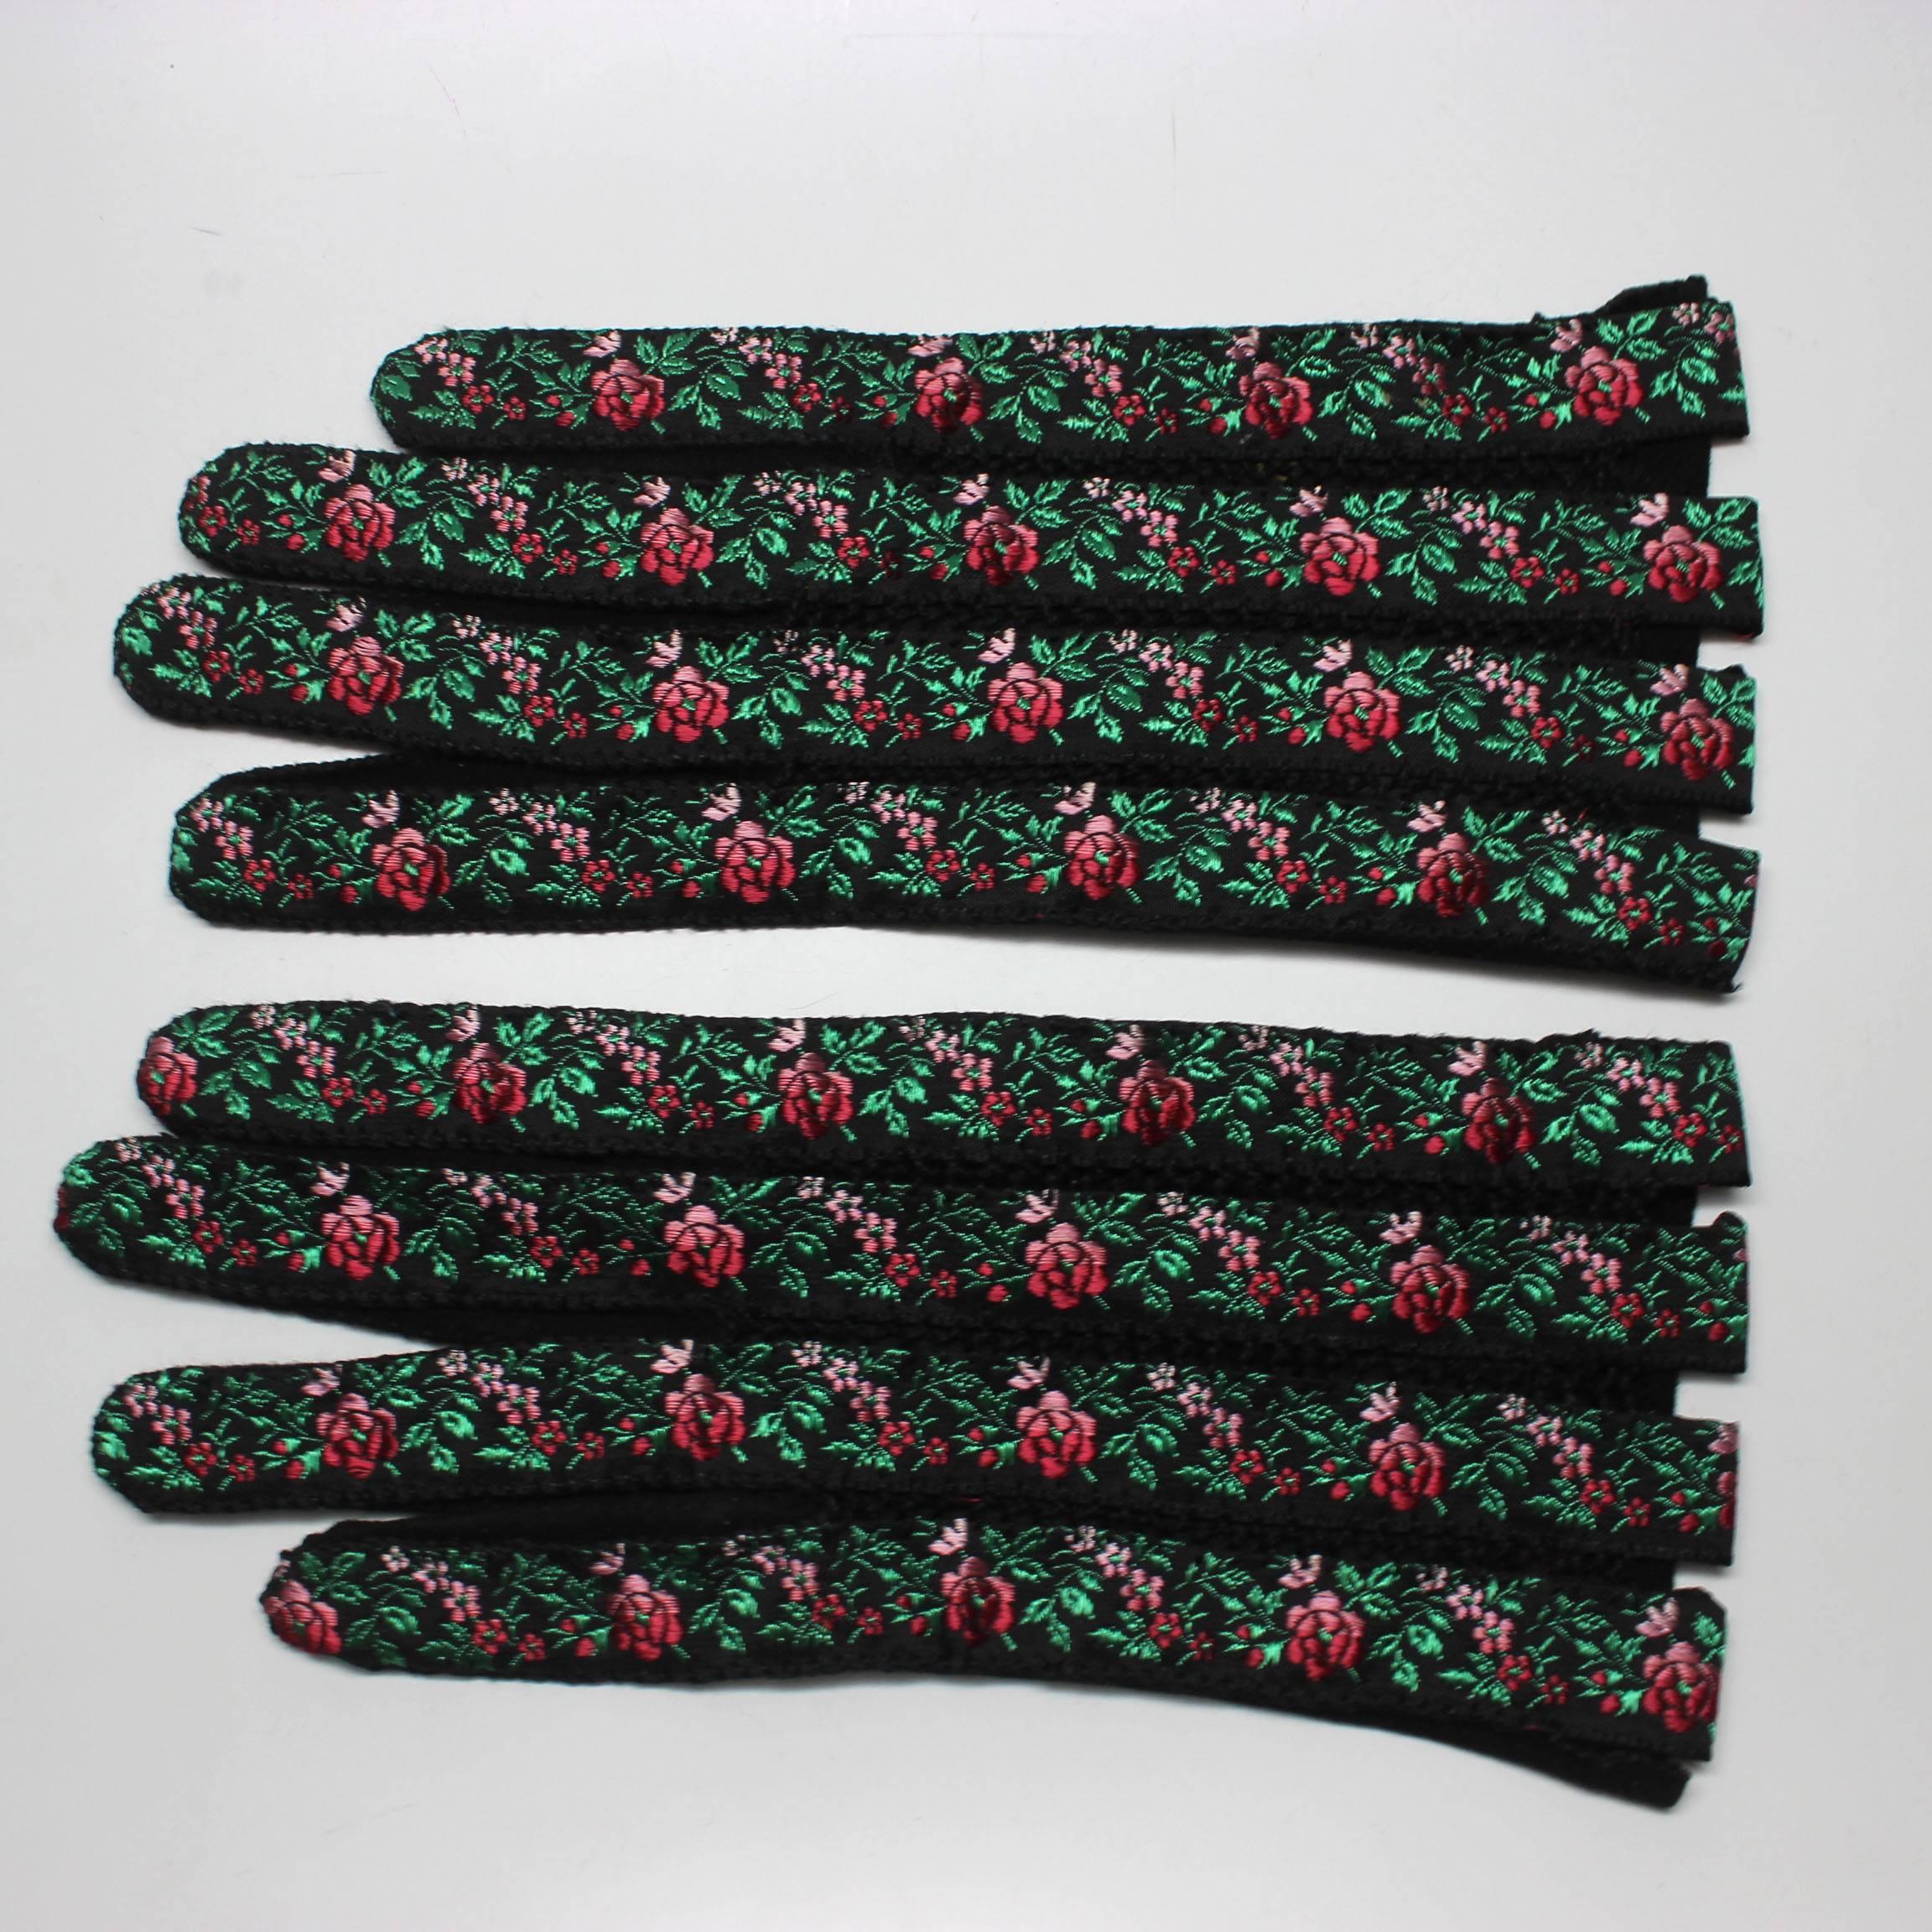 These vintage embroidered gloves are a beautiful floral on strips of ribbon with delicate crochet between the fingers The design is a vibrant green with ombre rose to red flowers on the black glove. The underside is a supple suede. 
Approximate size